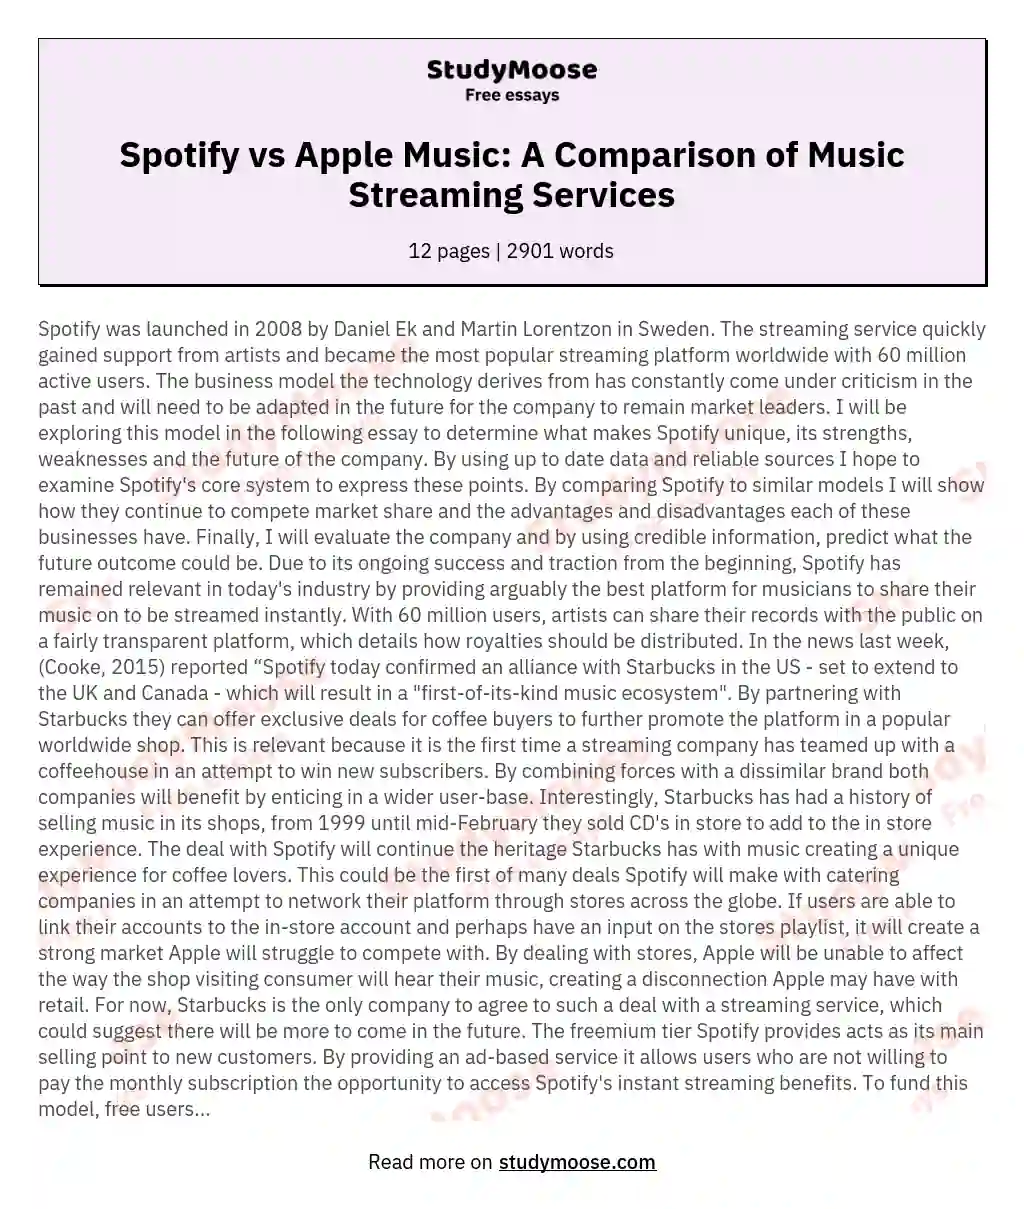 Spotify vs Apple Music: A Comparison of Music Streaming Services essay